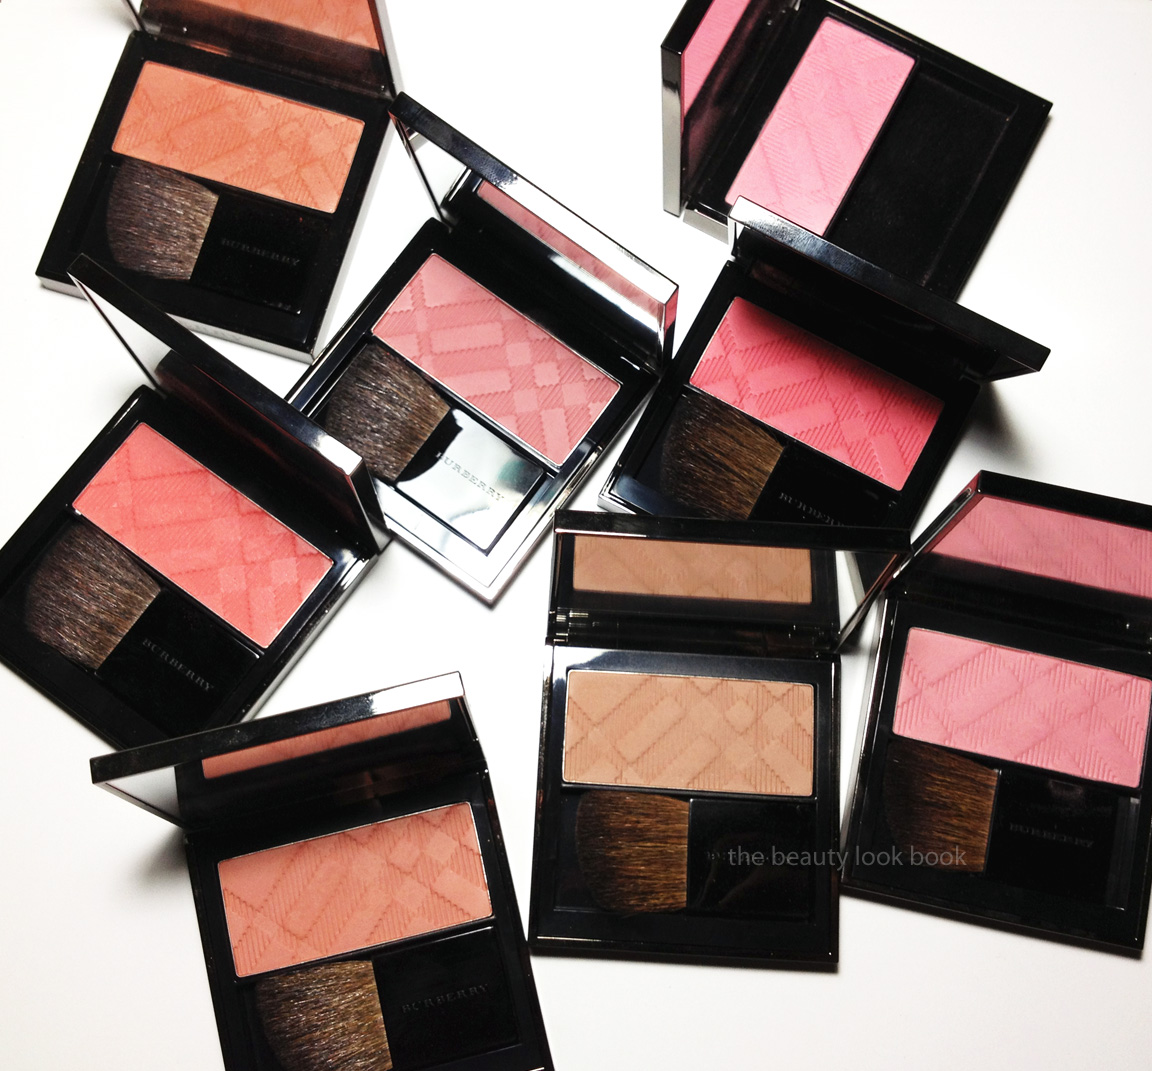 Burberry Beauty Light Glow Natural Blushes - The Beauty Look Book